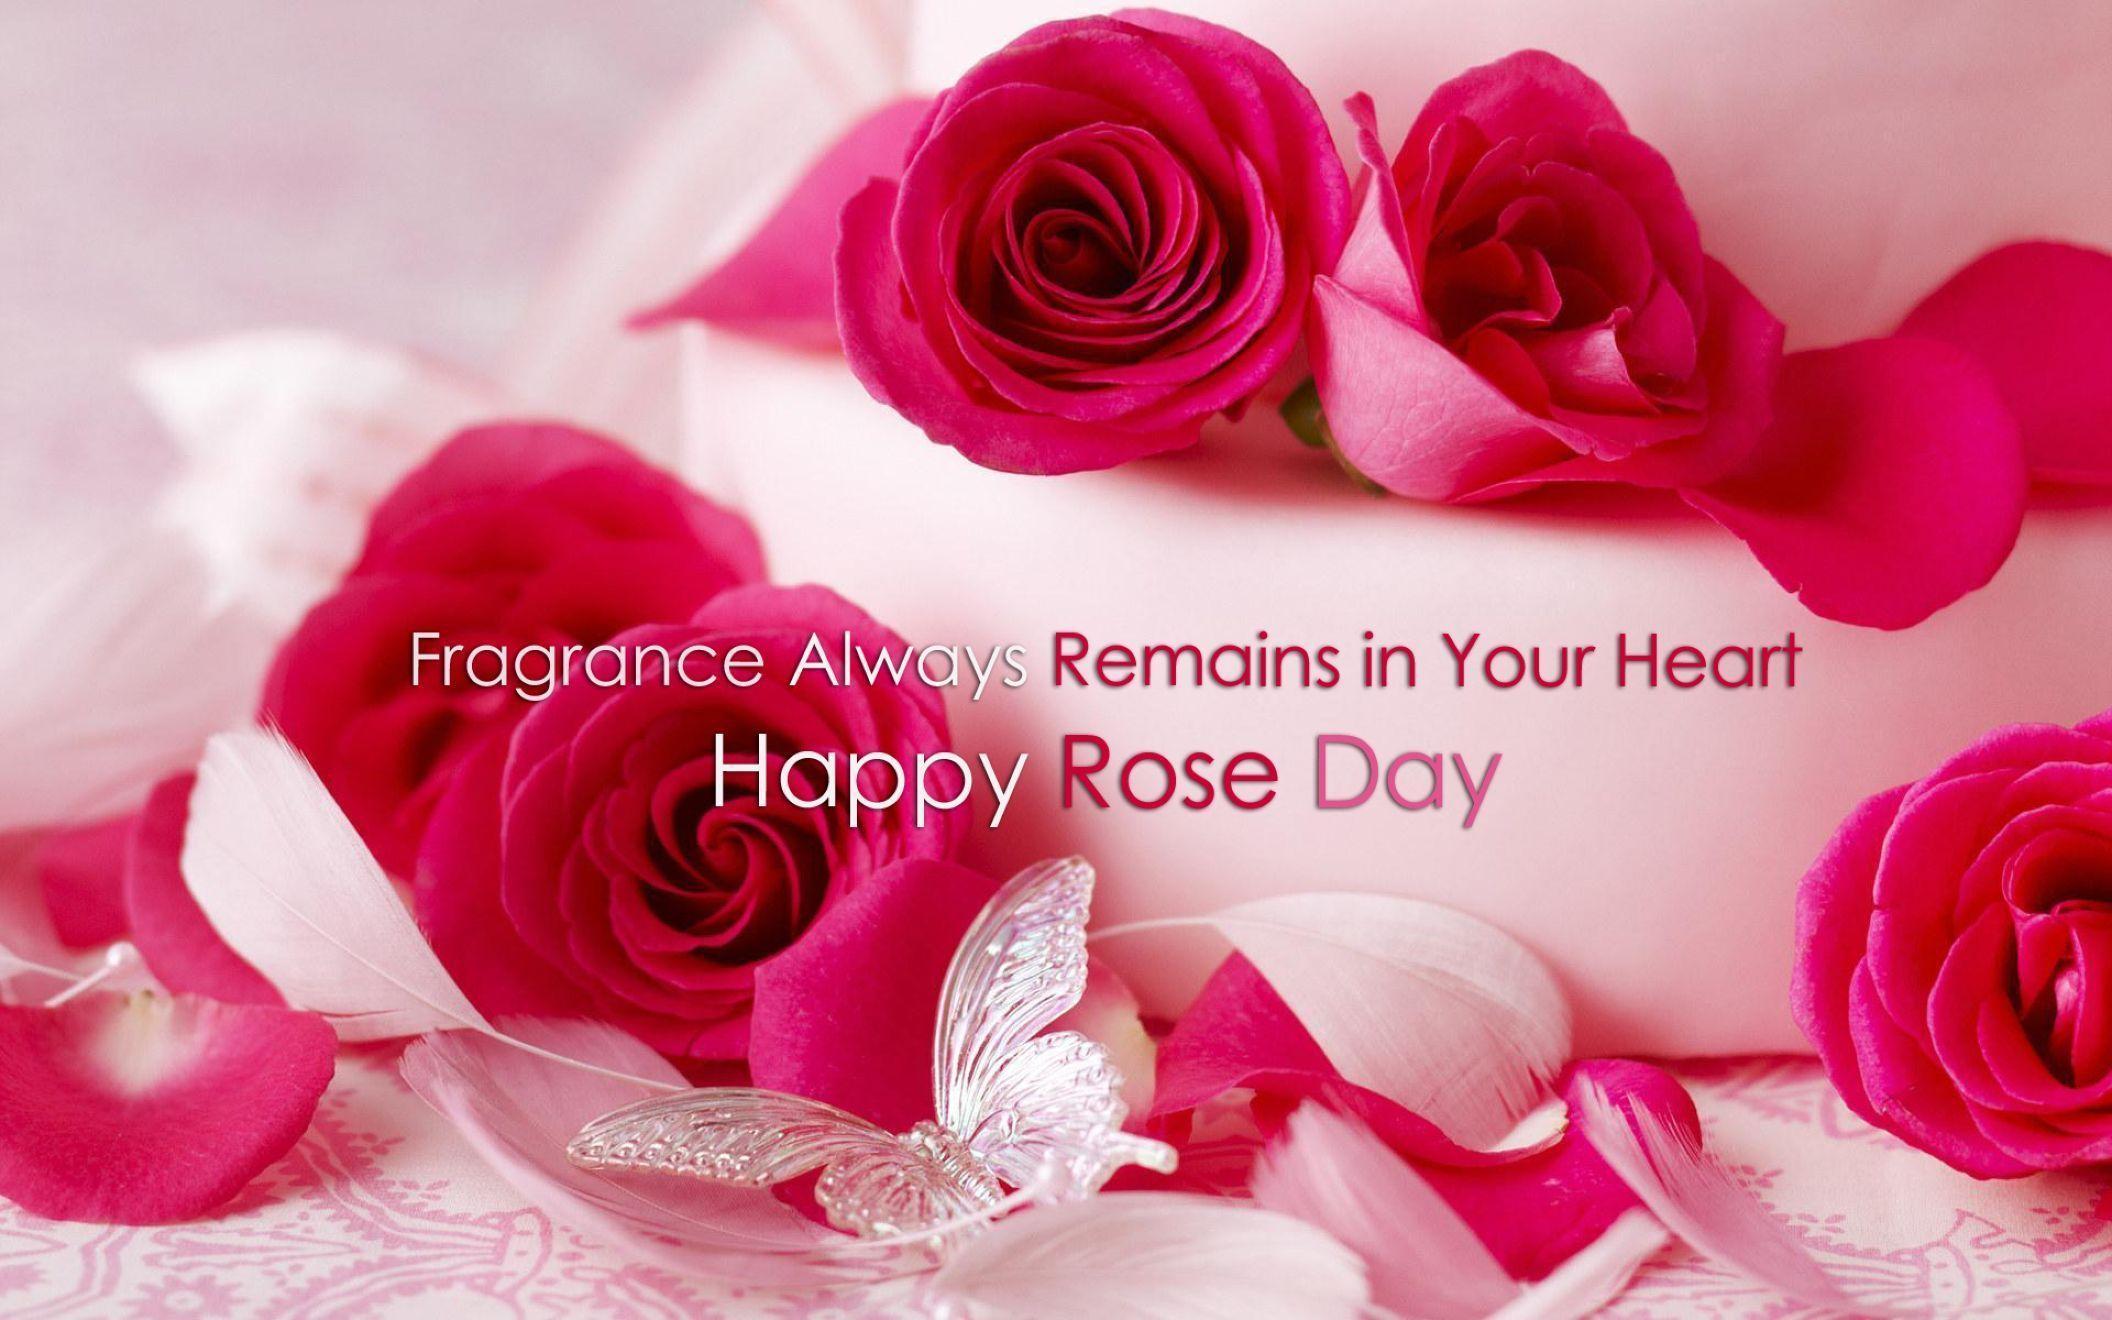 Happy Rose Day 2016 Red Rose With Love Quotes Wallpaper: Desktop